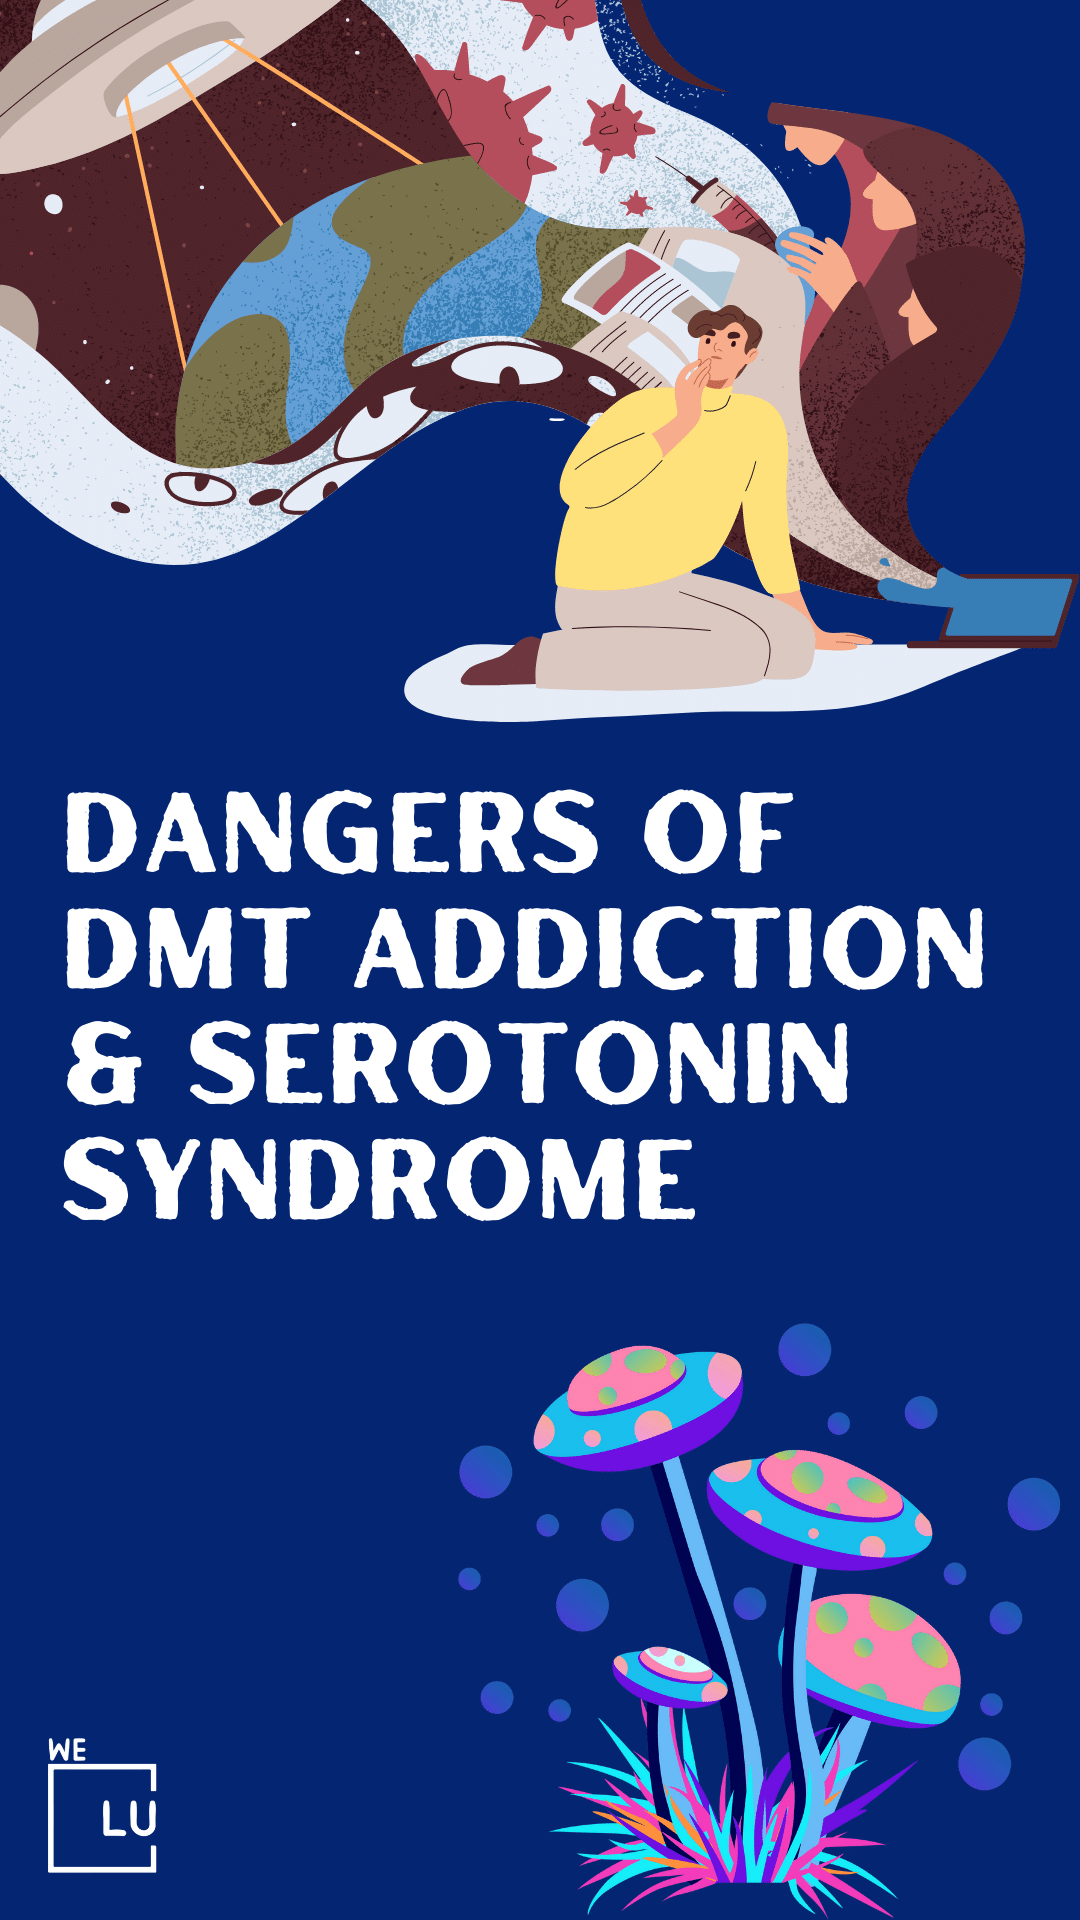 What is DMT? DMT can induce profound alterations in perception, thought patterns, and emotions. For some individuals, these effects can be overwhelming or distressing, potentially leading to panic, anxiety, or even a temporary loss of touch with reality. Pre-existing mental health conditions, such as schizophrenia or psychosis, can be exacerbated by DMT use.